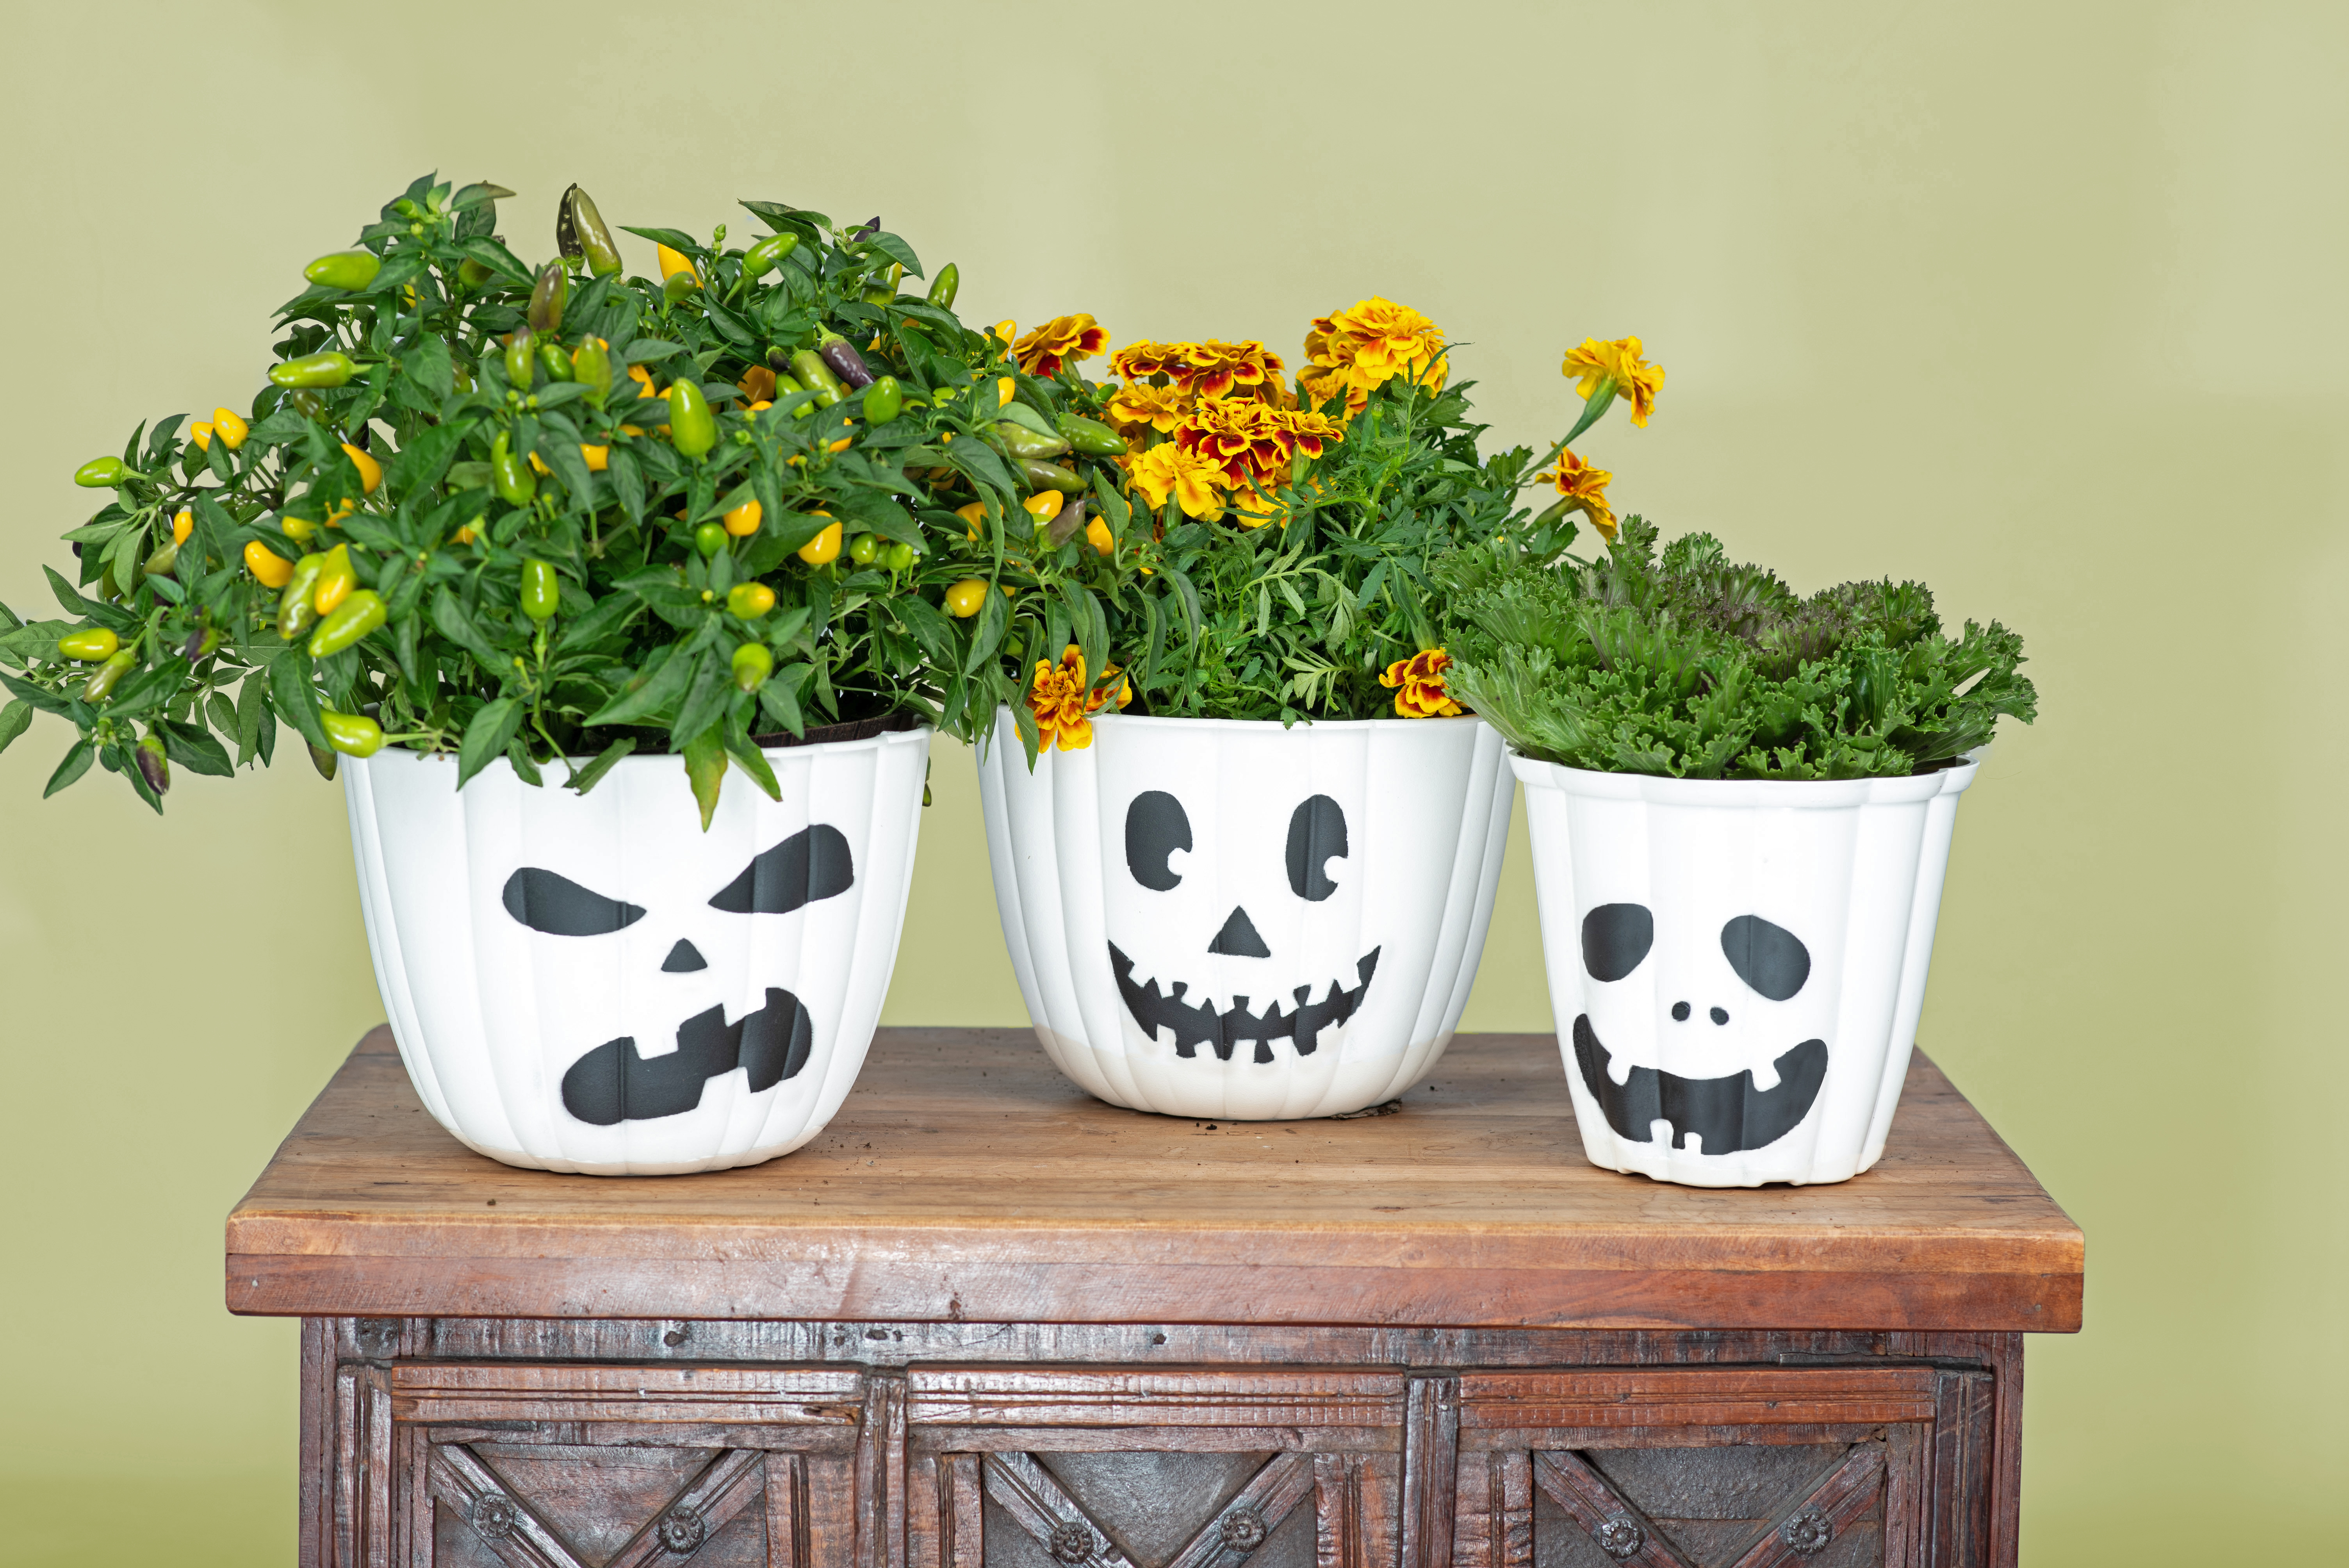 Image of some scary pots